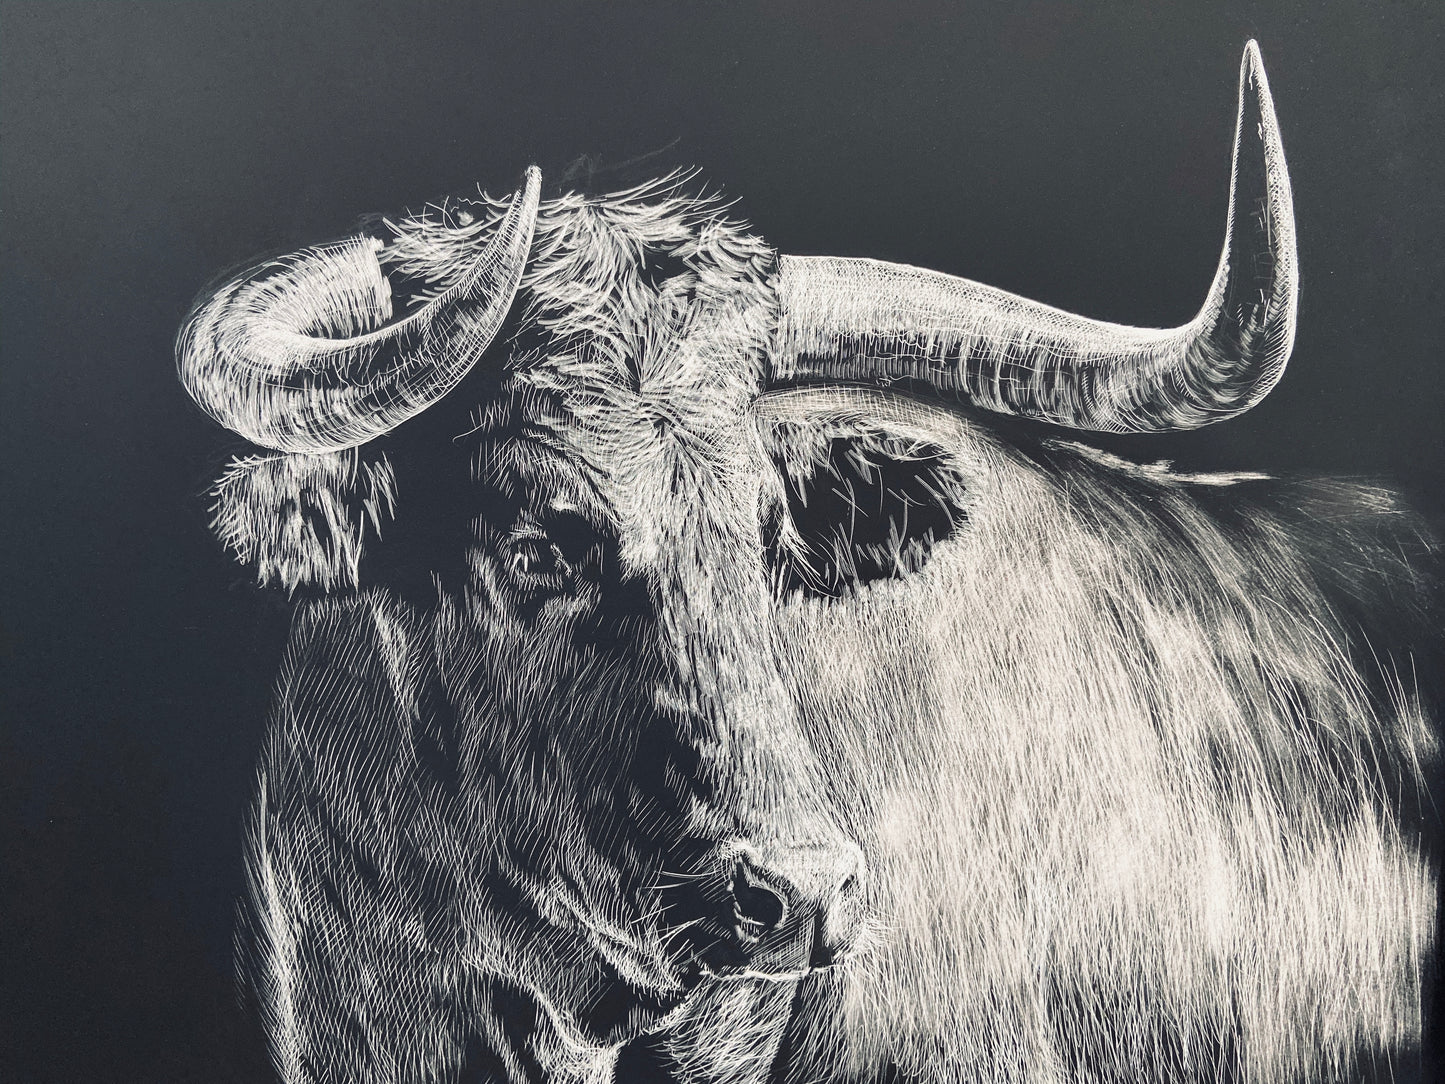 Etching of a Bull, 18x24 inch giclee print, by Erik Linton